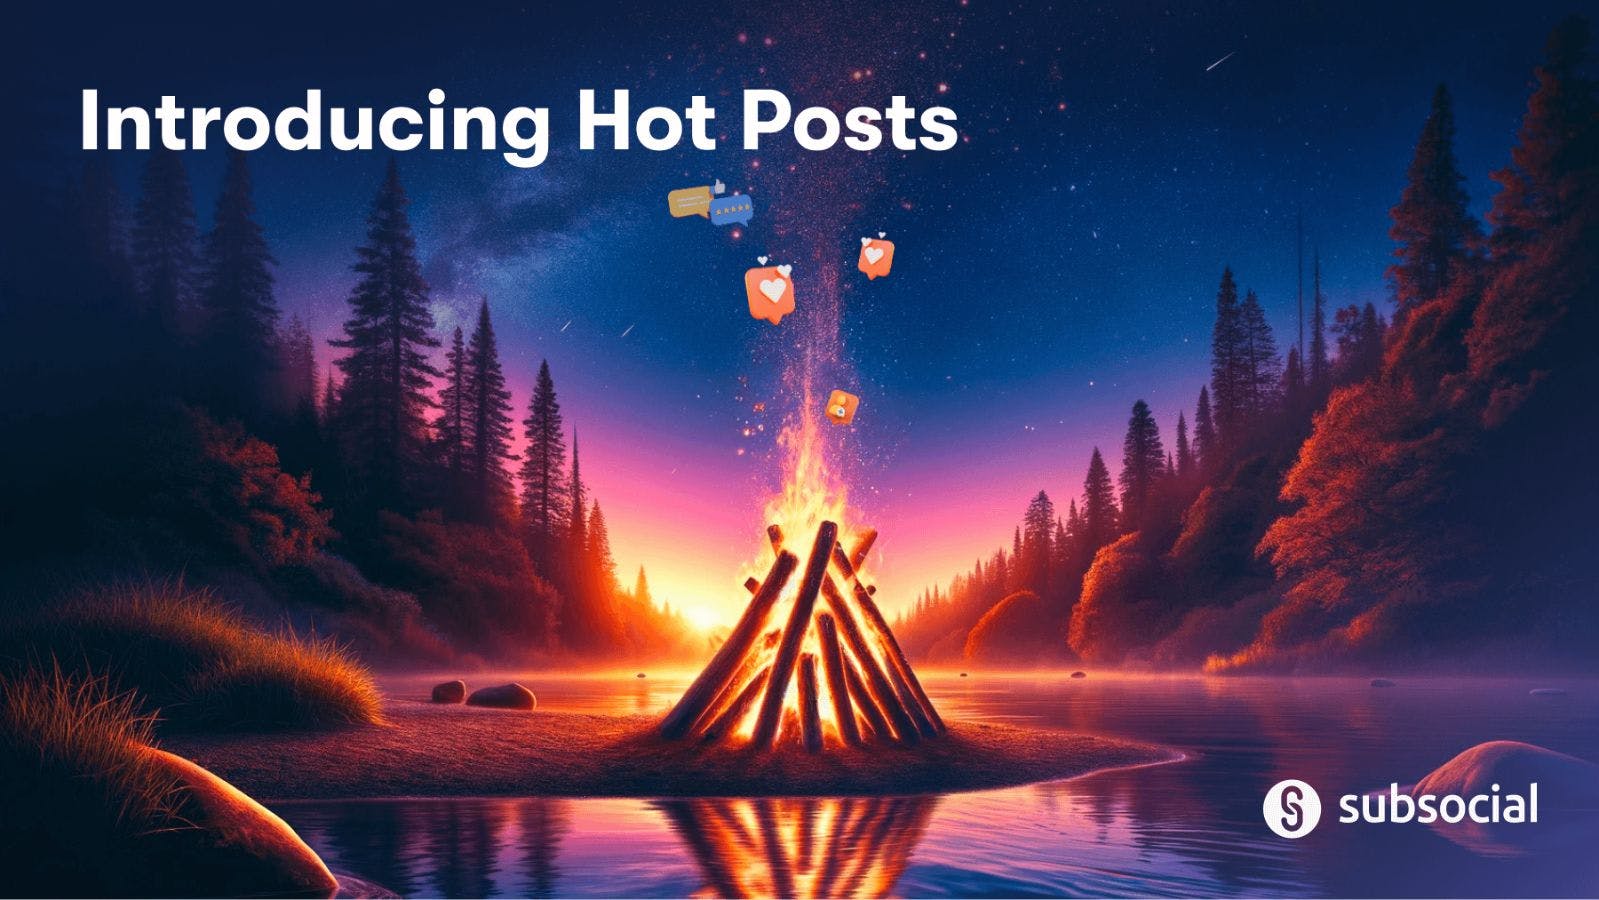 The New Hot Posts Tab Is Heating Things Up!